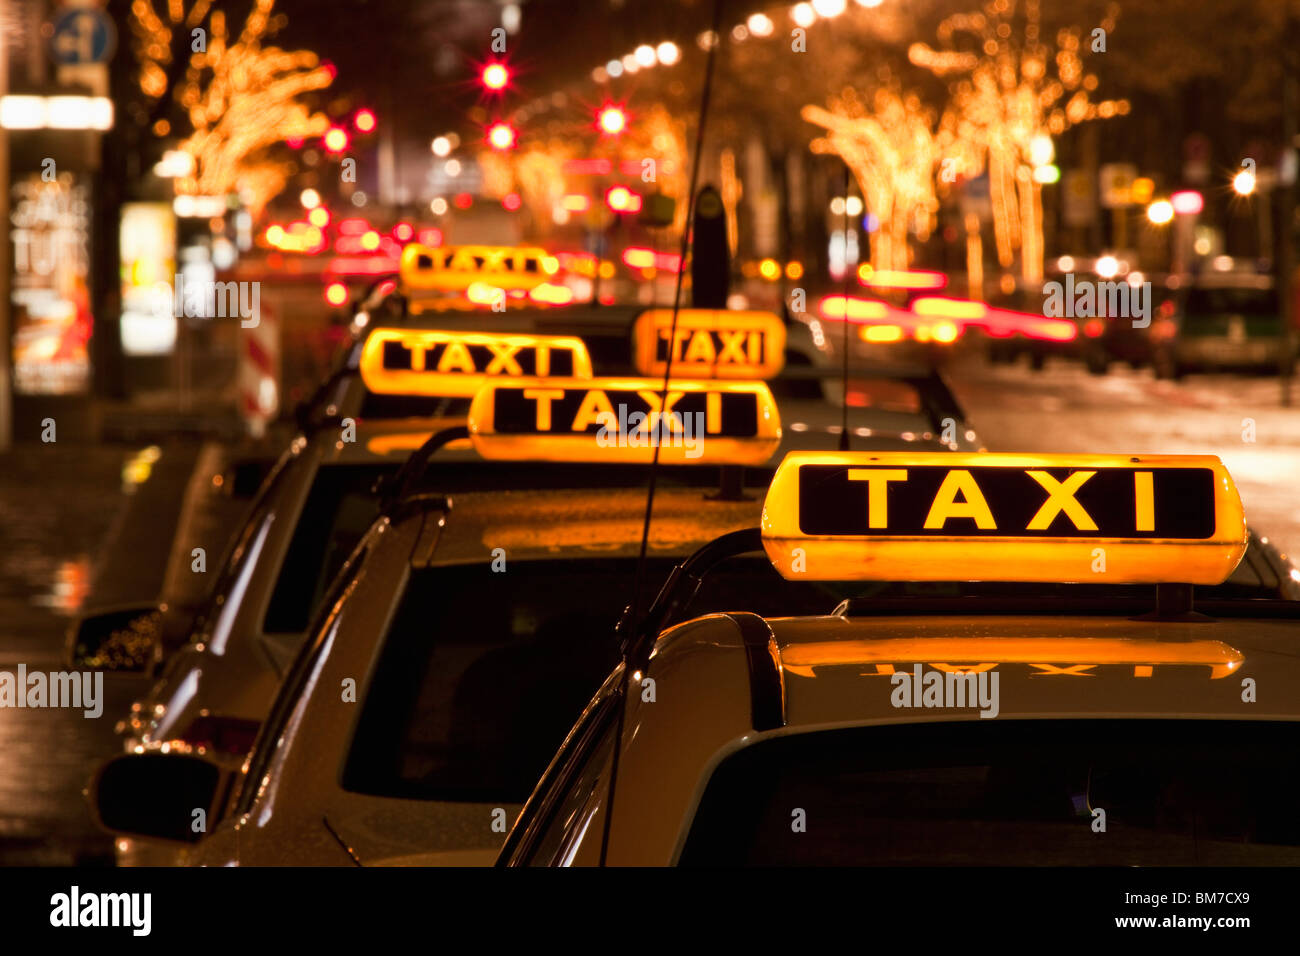 Detail of taxi cabs parked in a row at night Stock Photo